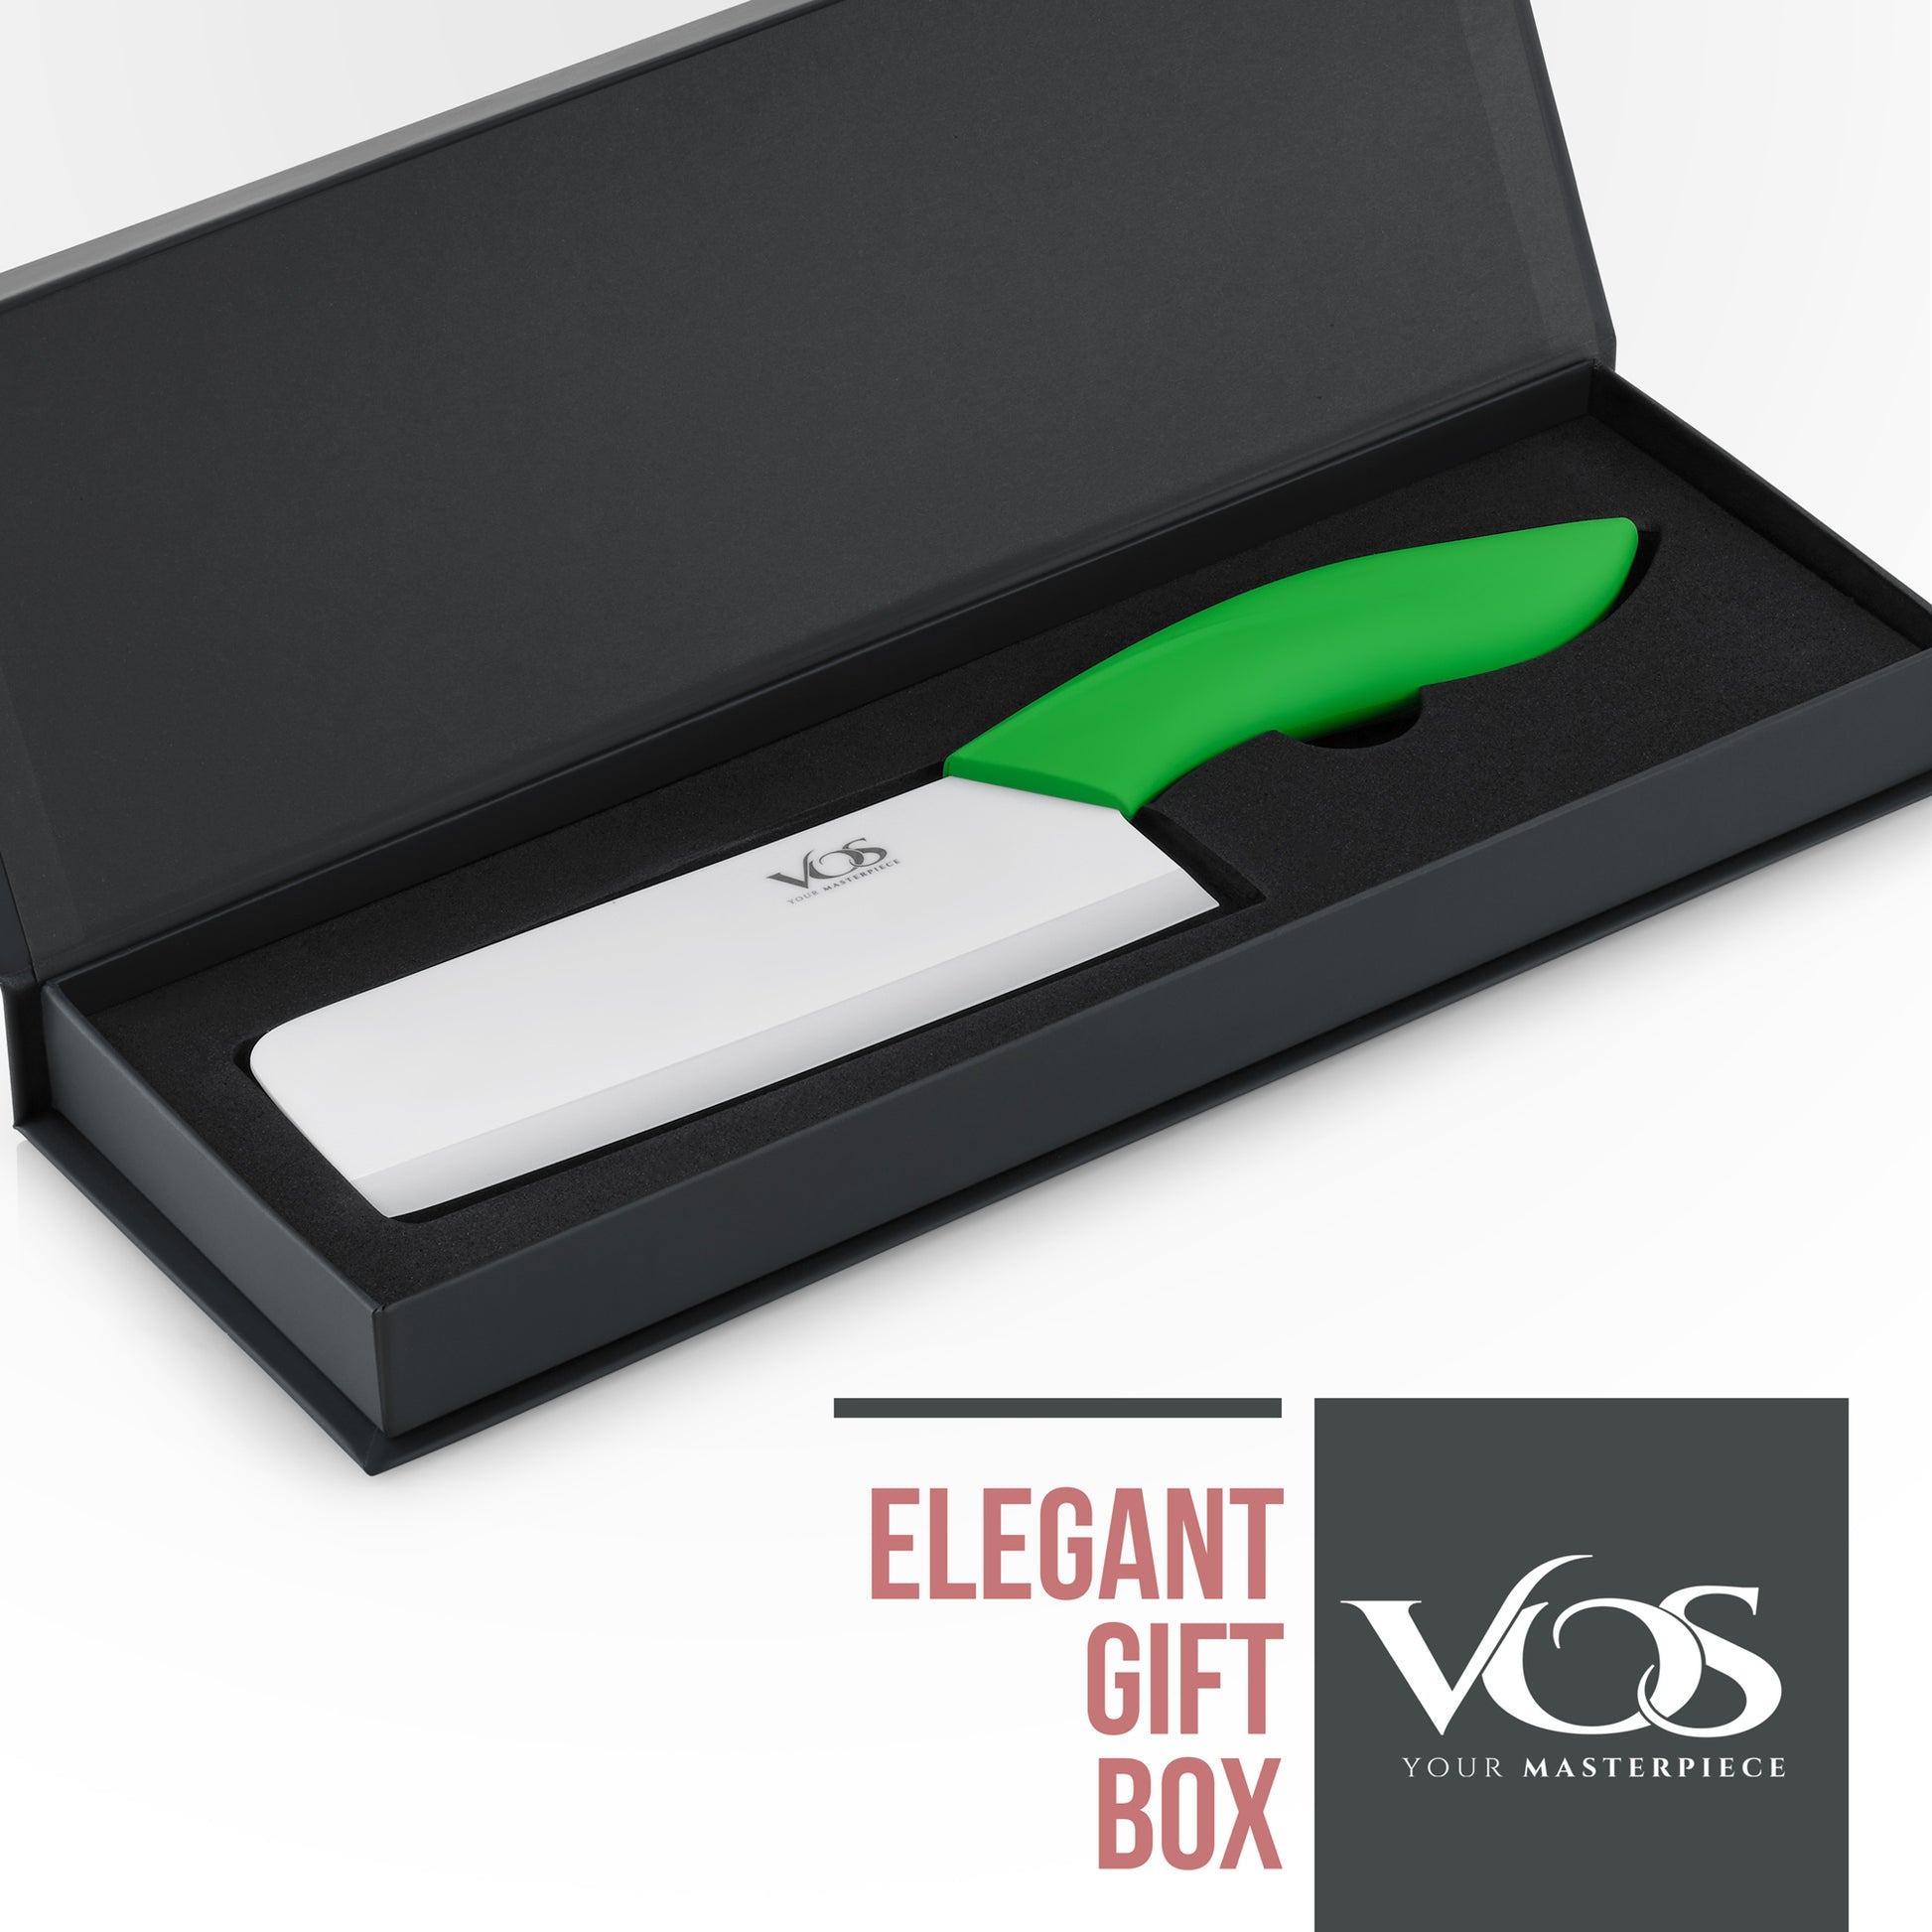 8 Inches Ceramic Knife Chef with Gift box - Green